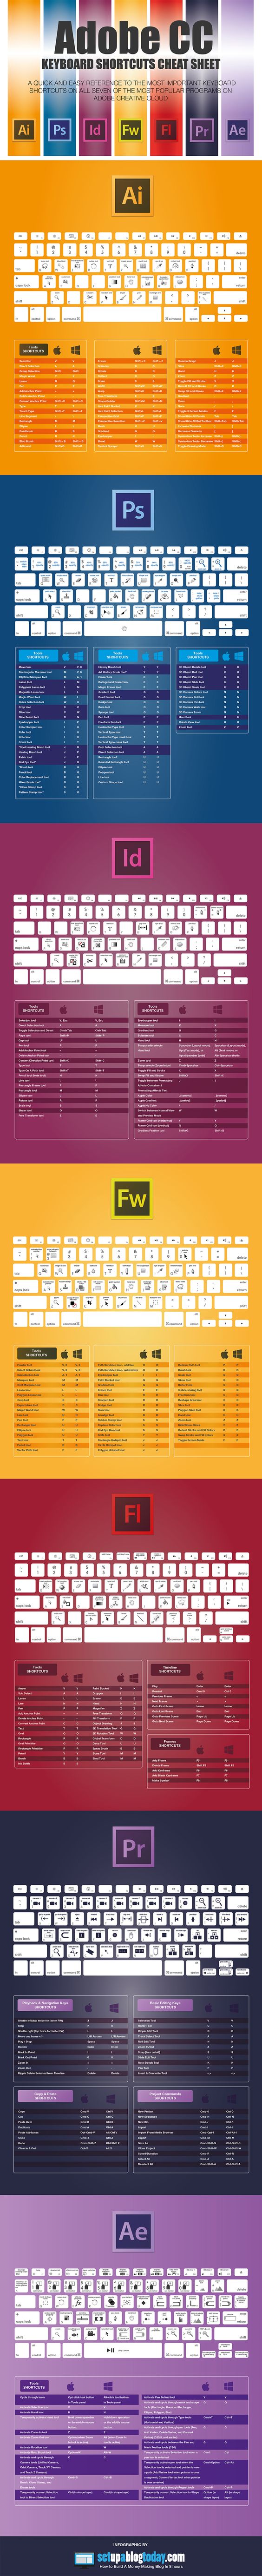 Keyboard shortcuts are the ticket to working faster in many programs. This cheat sheet will help you work more efficiently in Adobe Creative Cloud apps, including Photoshop, Illustrator, InDesign, and Premier Pro.